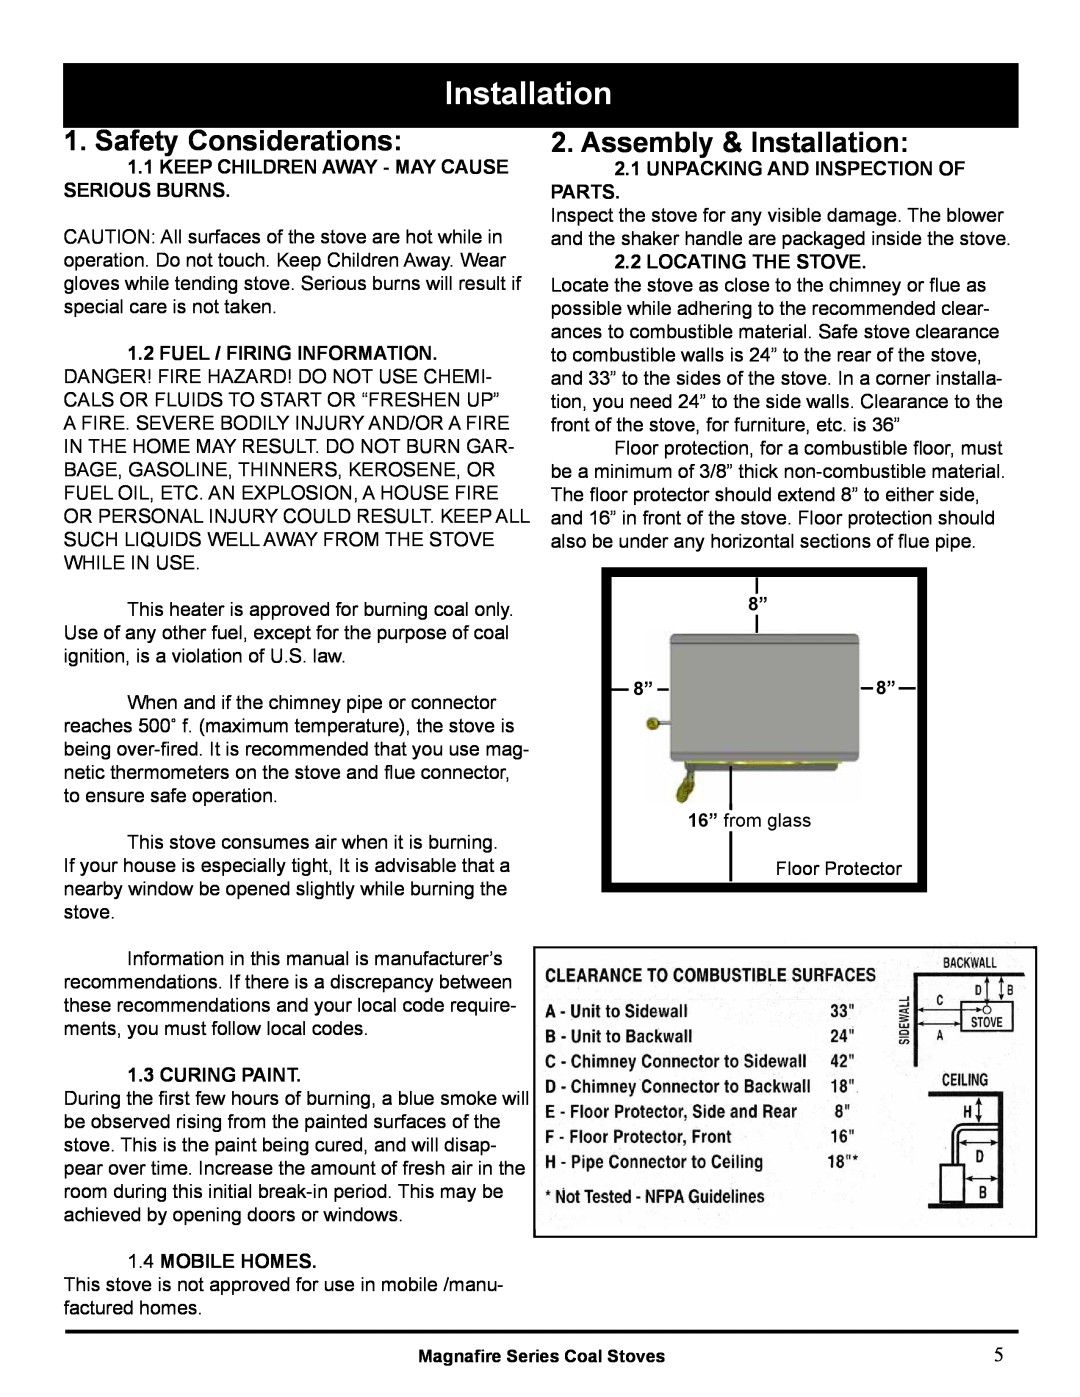 Harman Stove Company MARK III Safety Considerations, Assembly & Installation, Fuel / Firing Information, Curing Paint 